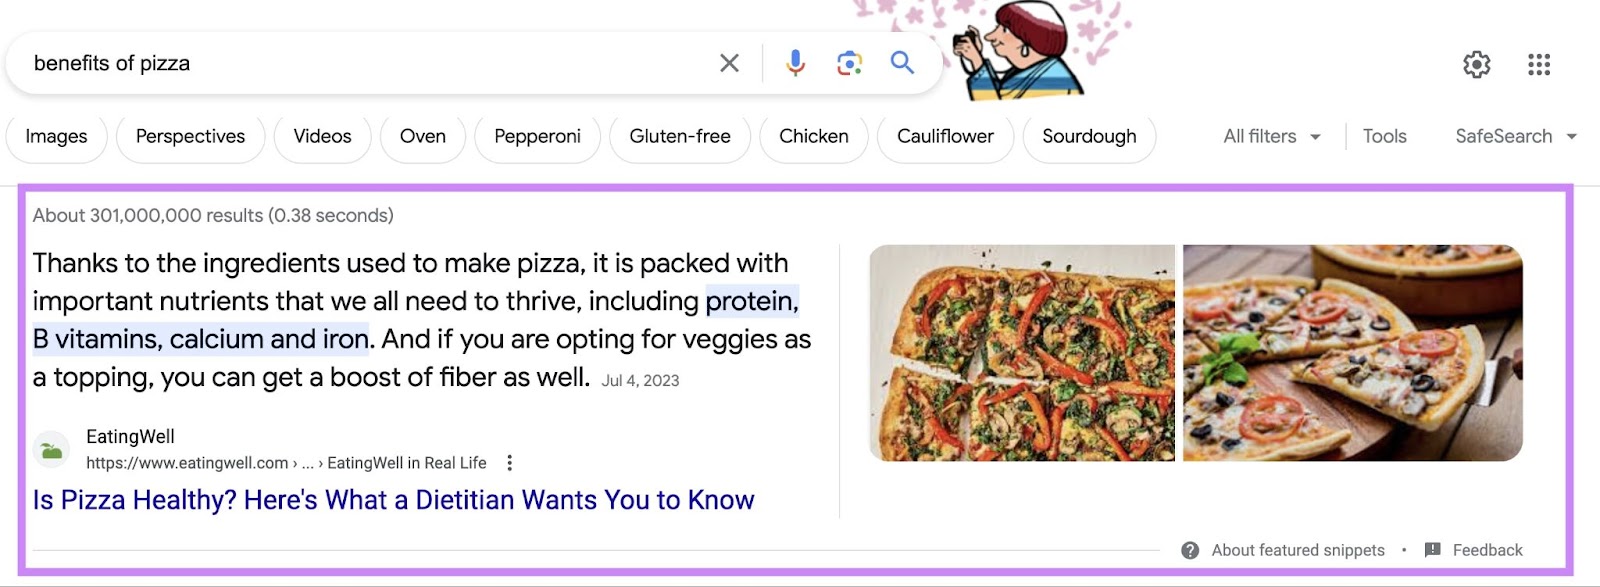 A featured snippet on Google SERP for "benefits of pizza" query